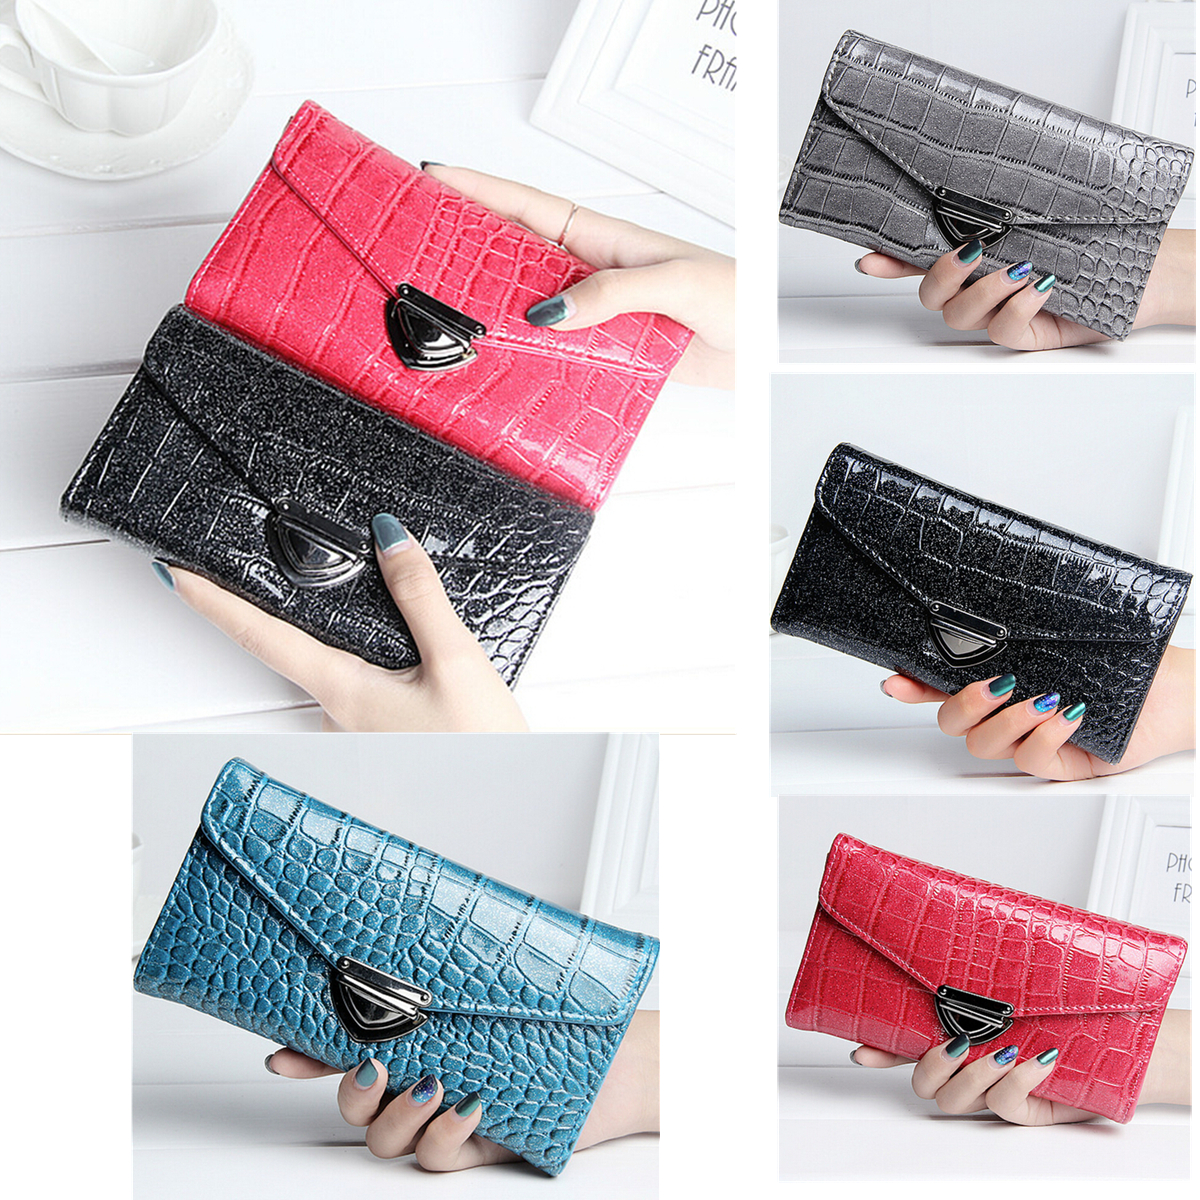 

Crocodile PU Leather Long Wallet Card Holder Purse Phone Bag for under 5.5 inches Smartphone